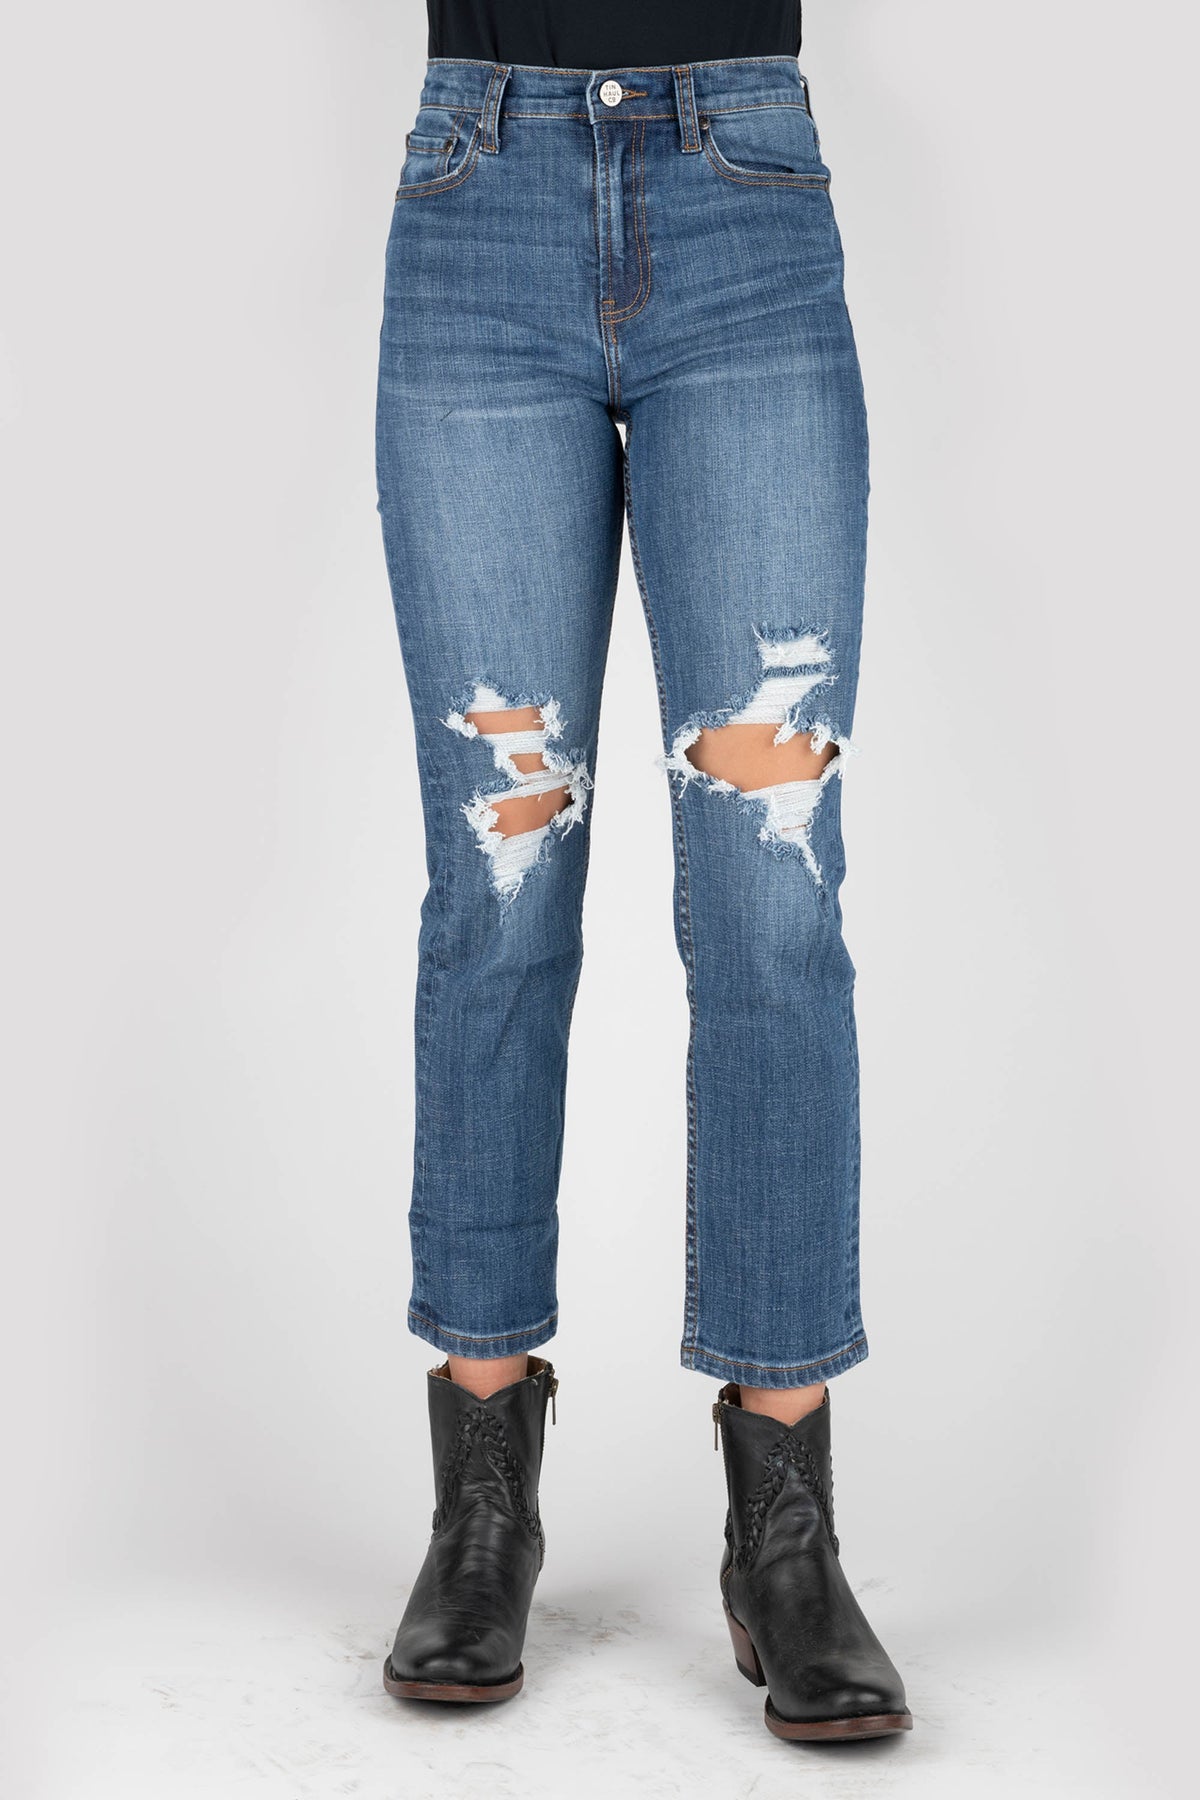 Tin Haul WOMENS HIGHRISE STRAIGHT CROP JEANS